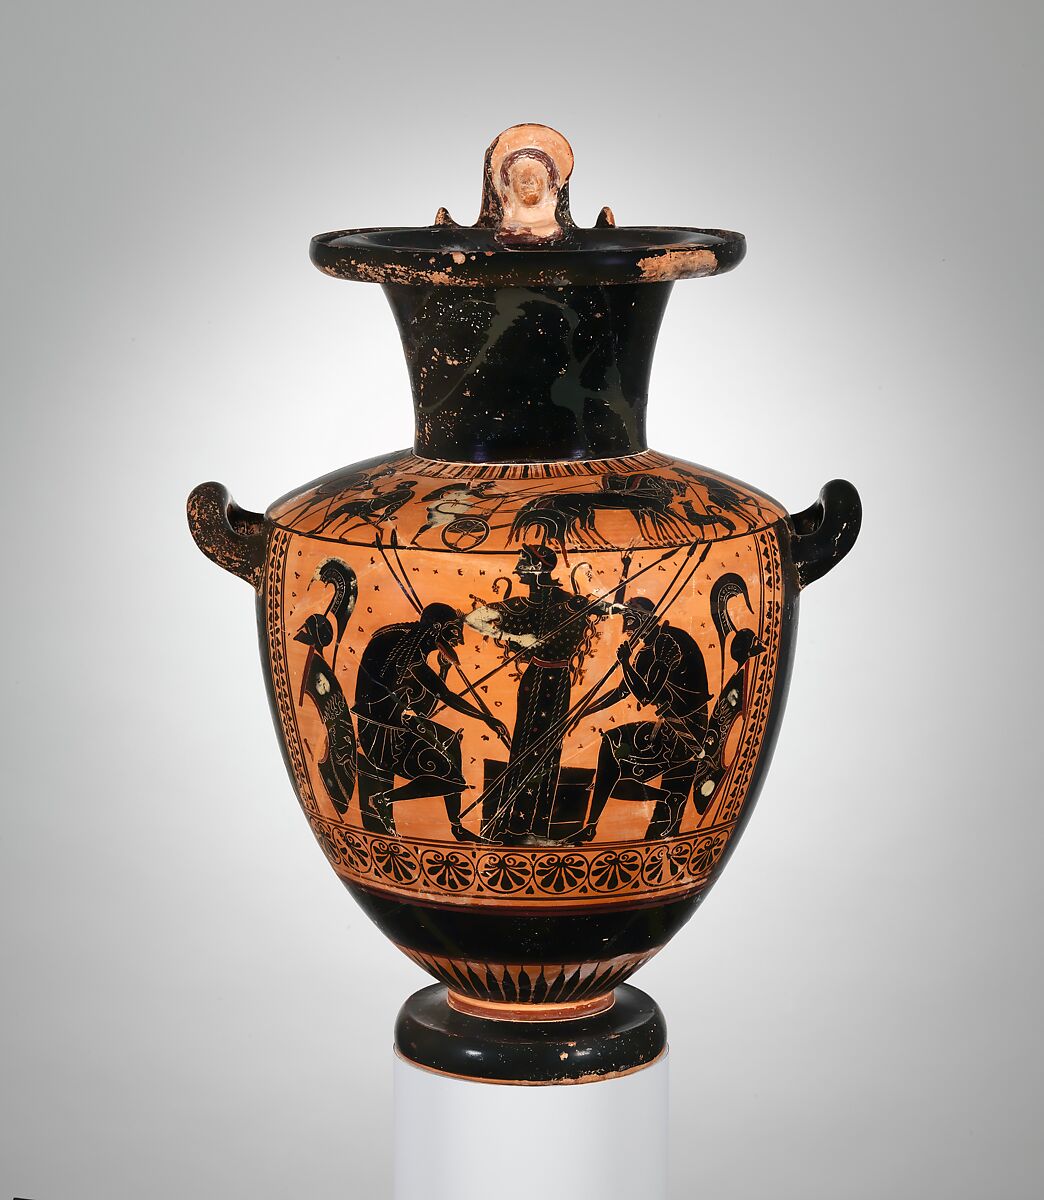 Terracotta hydria (water jar), Attributed to the Leagros Group, Terracotta, Greek, Attic 